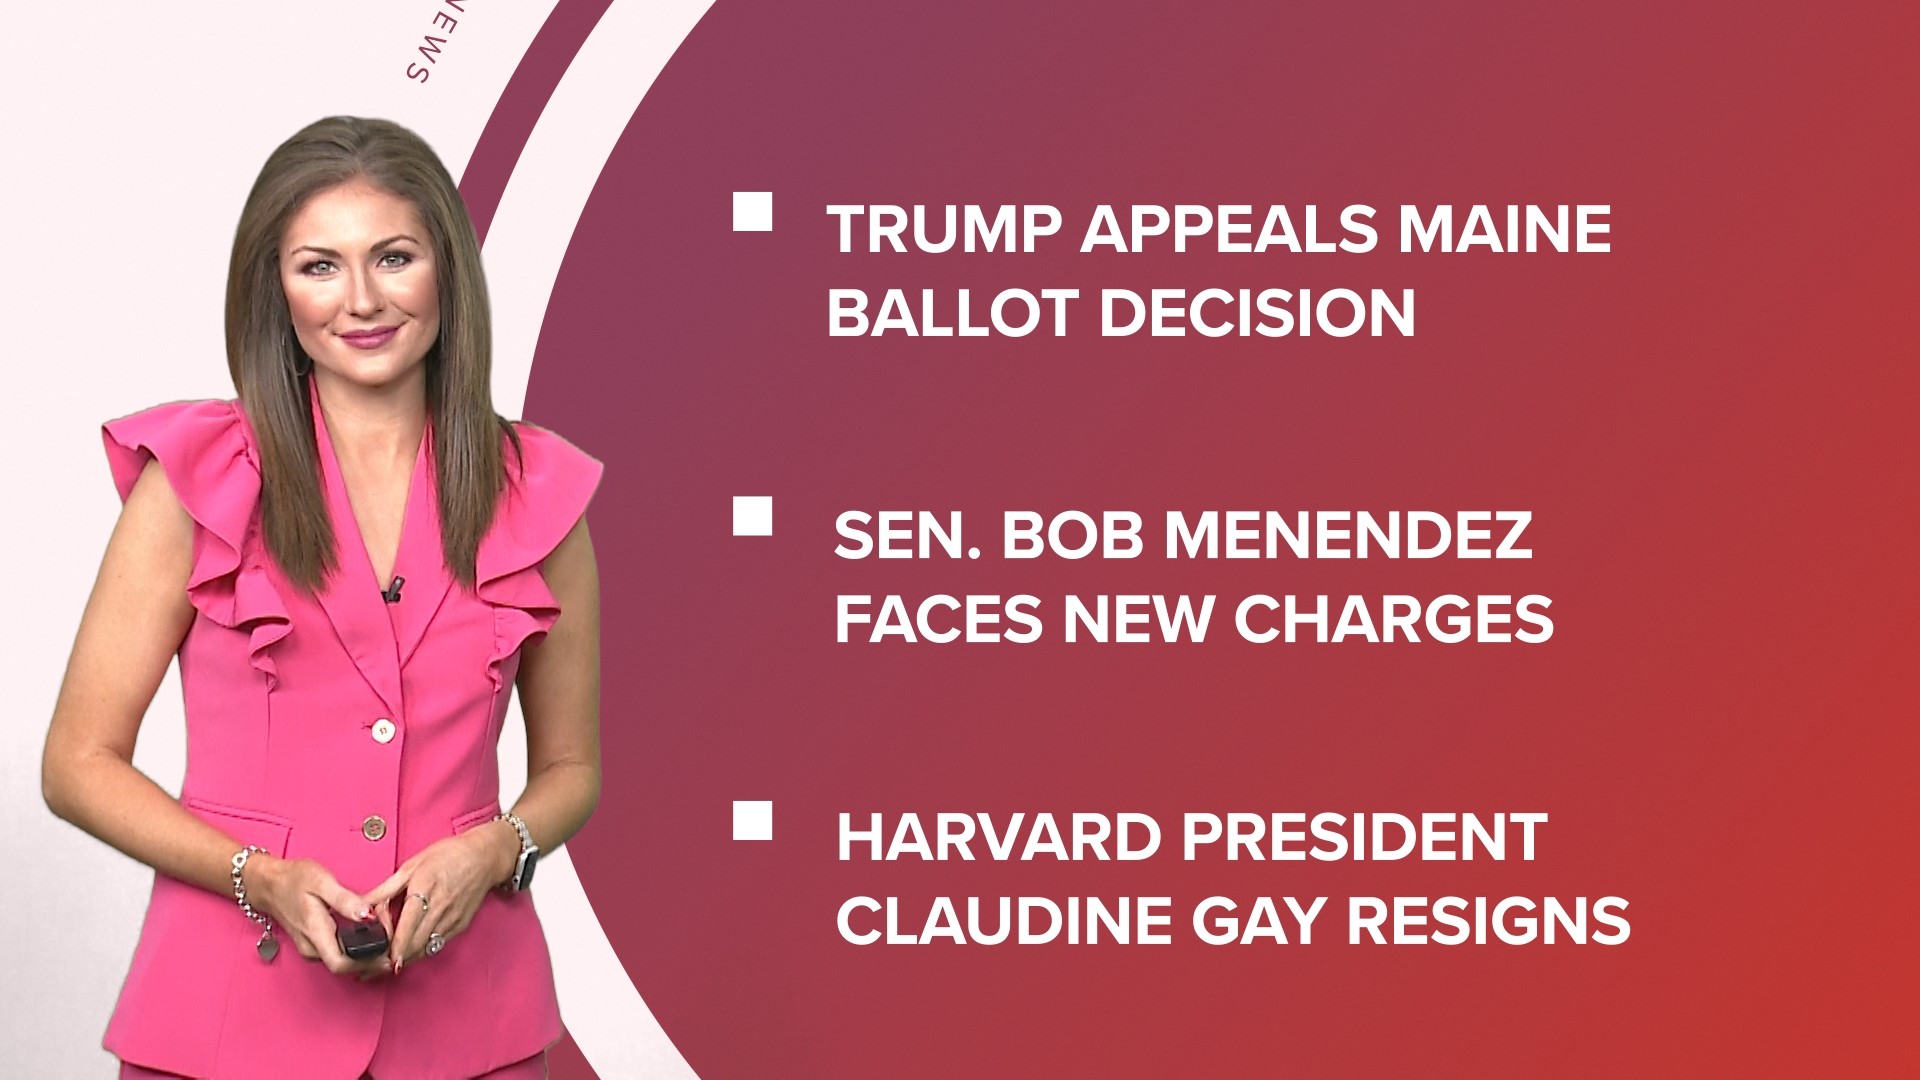 A look at what is happening in the news from Harvard's president resigns to Donald Trump appealing the Maine ballot ruling and Snoop Dogg covering the 2024 Olympics.